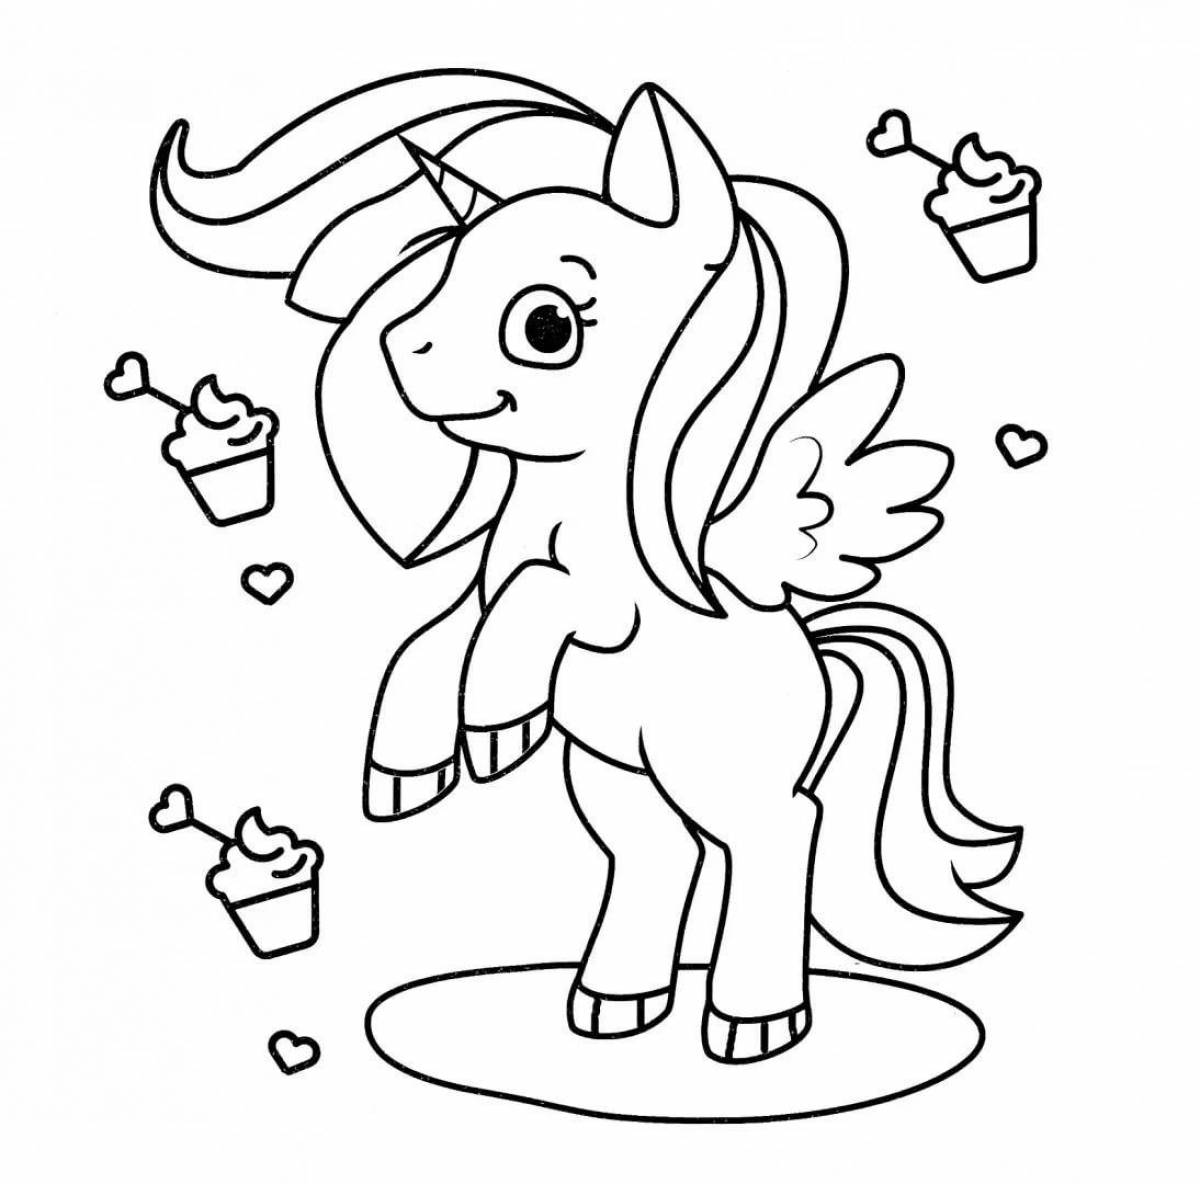 Amazing unicorn coloring pages for girls